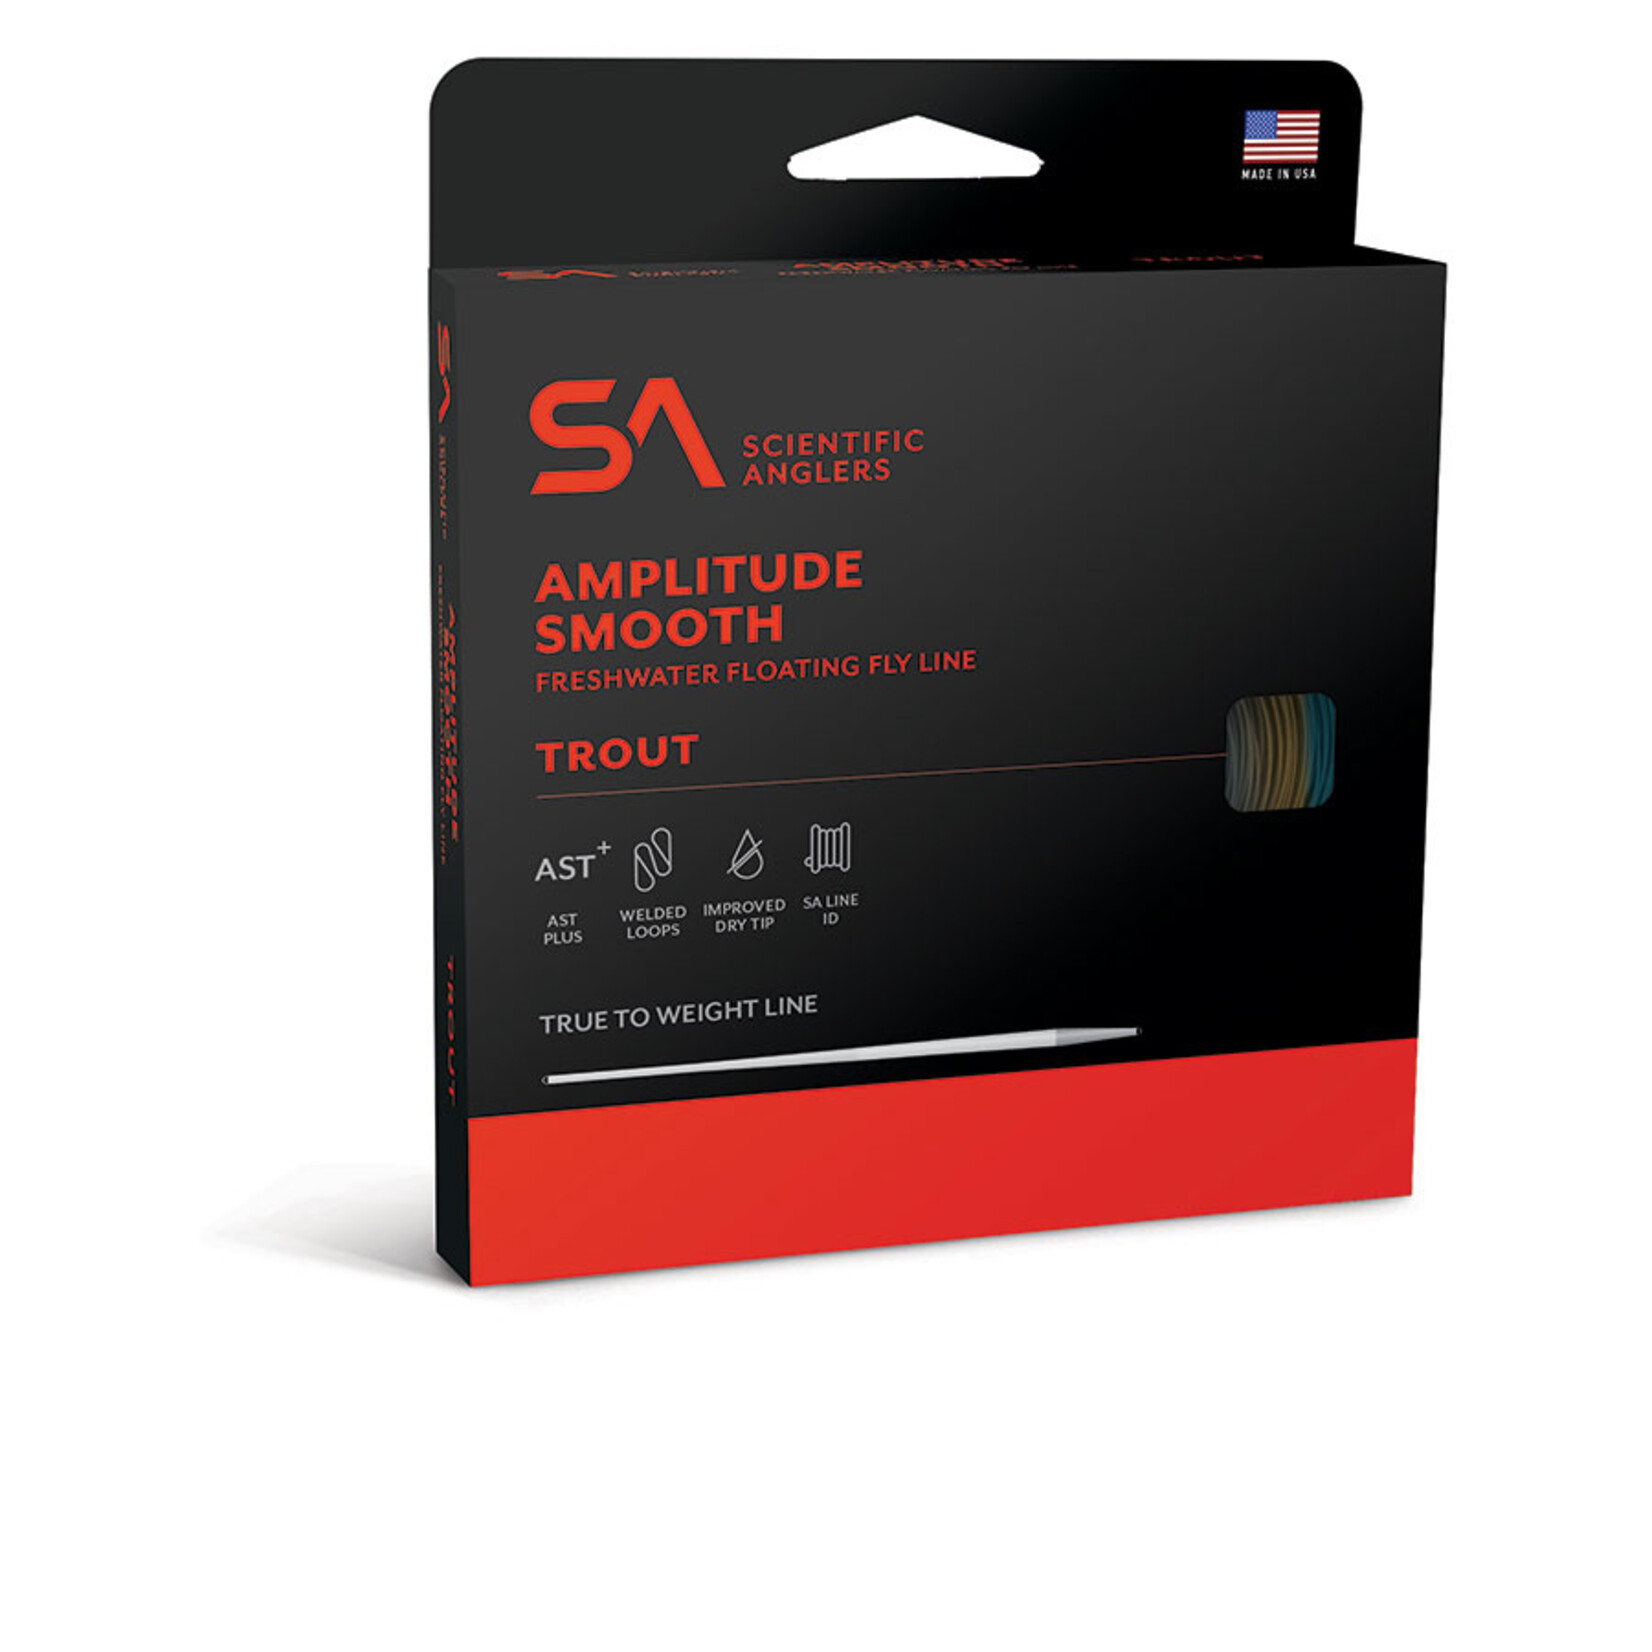 Scientific Anglers Amplitude Smooth Trout -